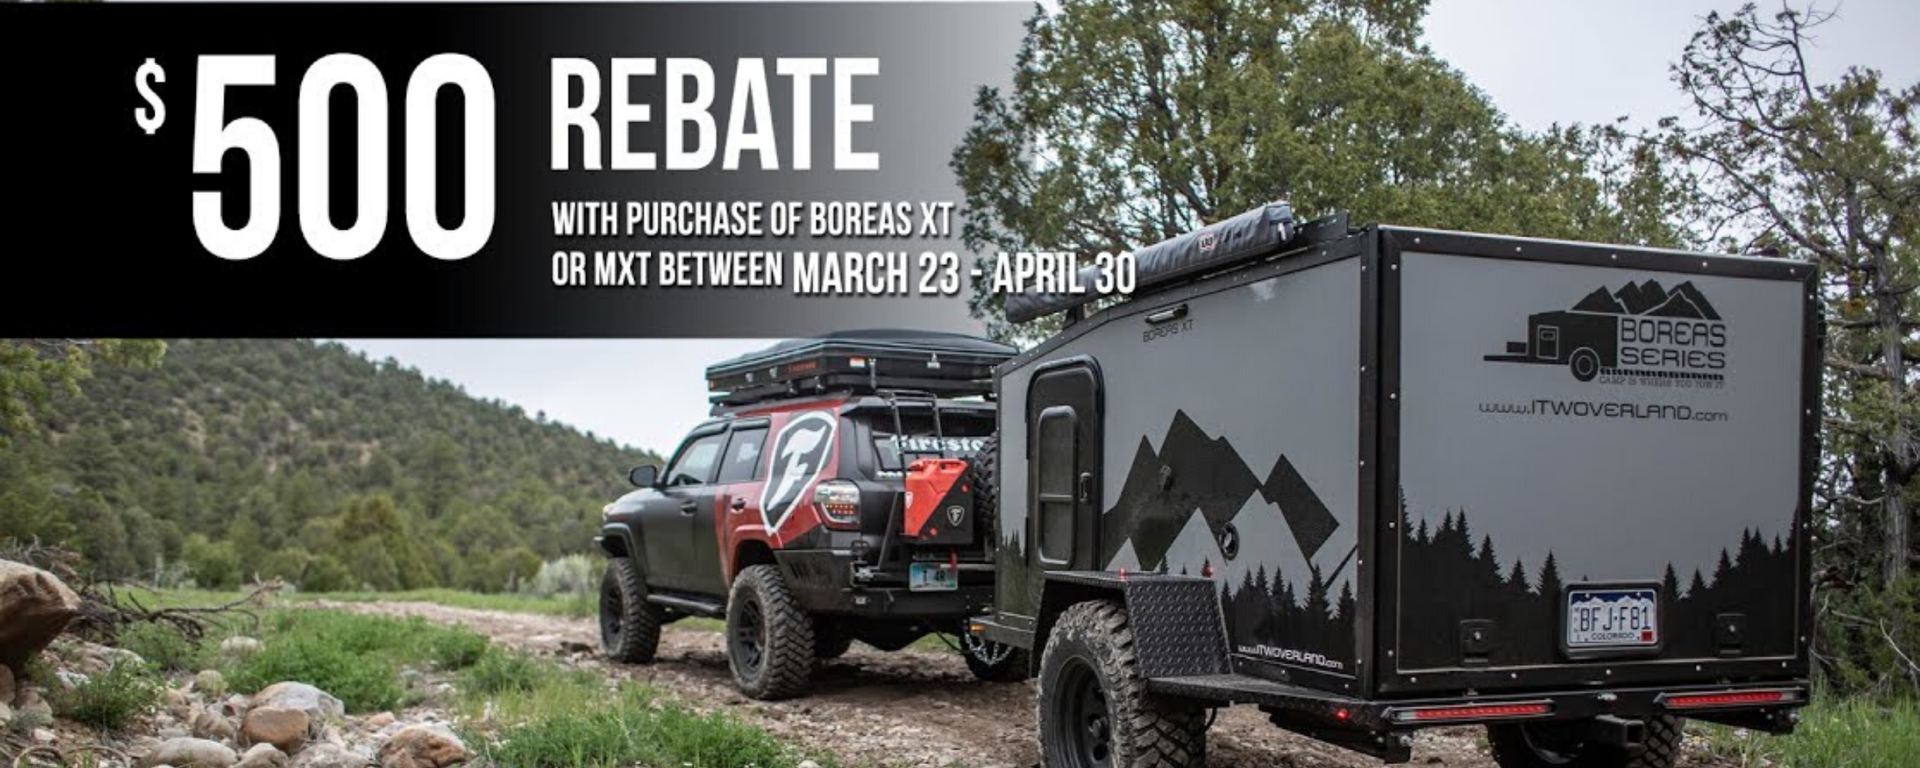 $500 rebate on XT and MXT models